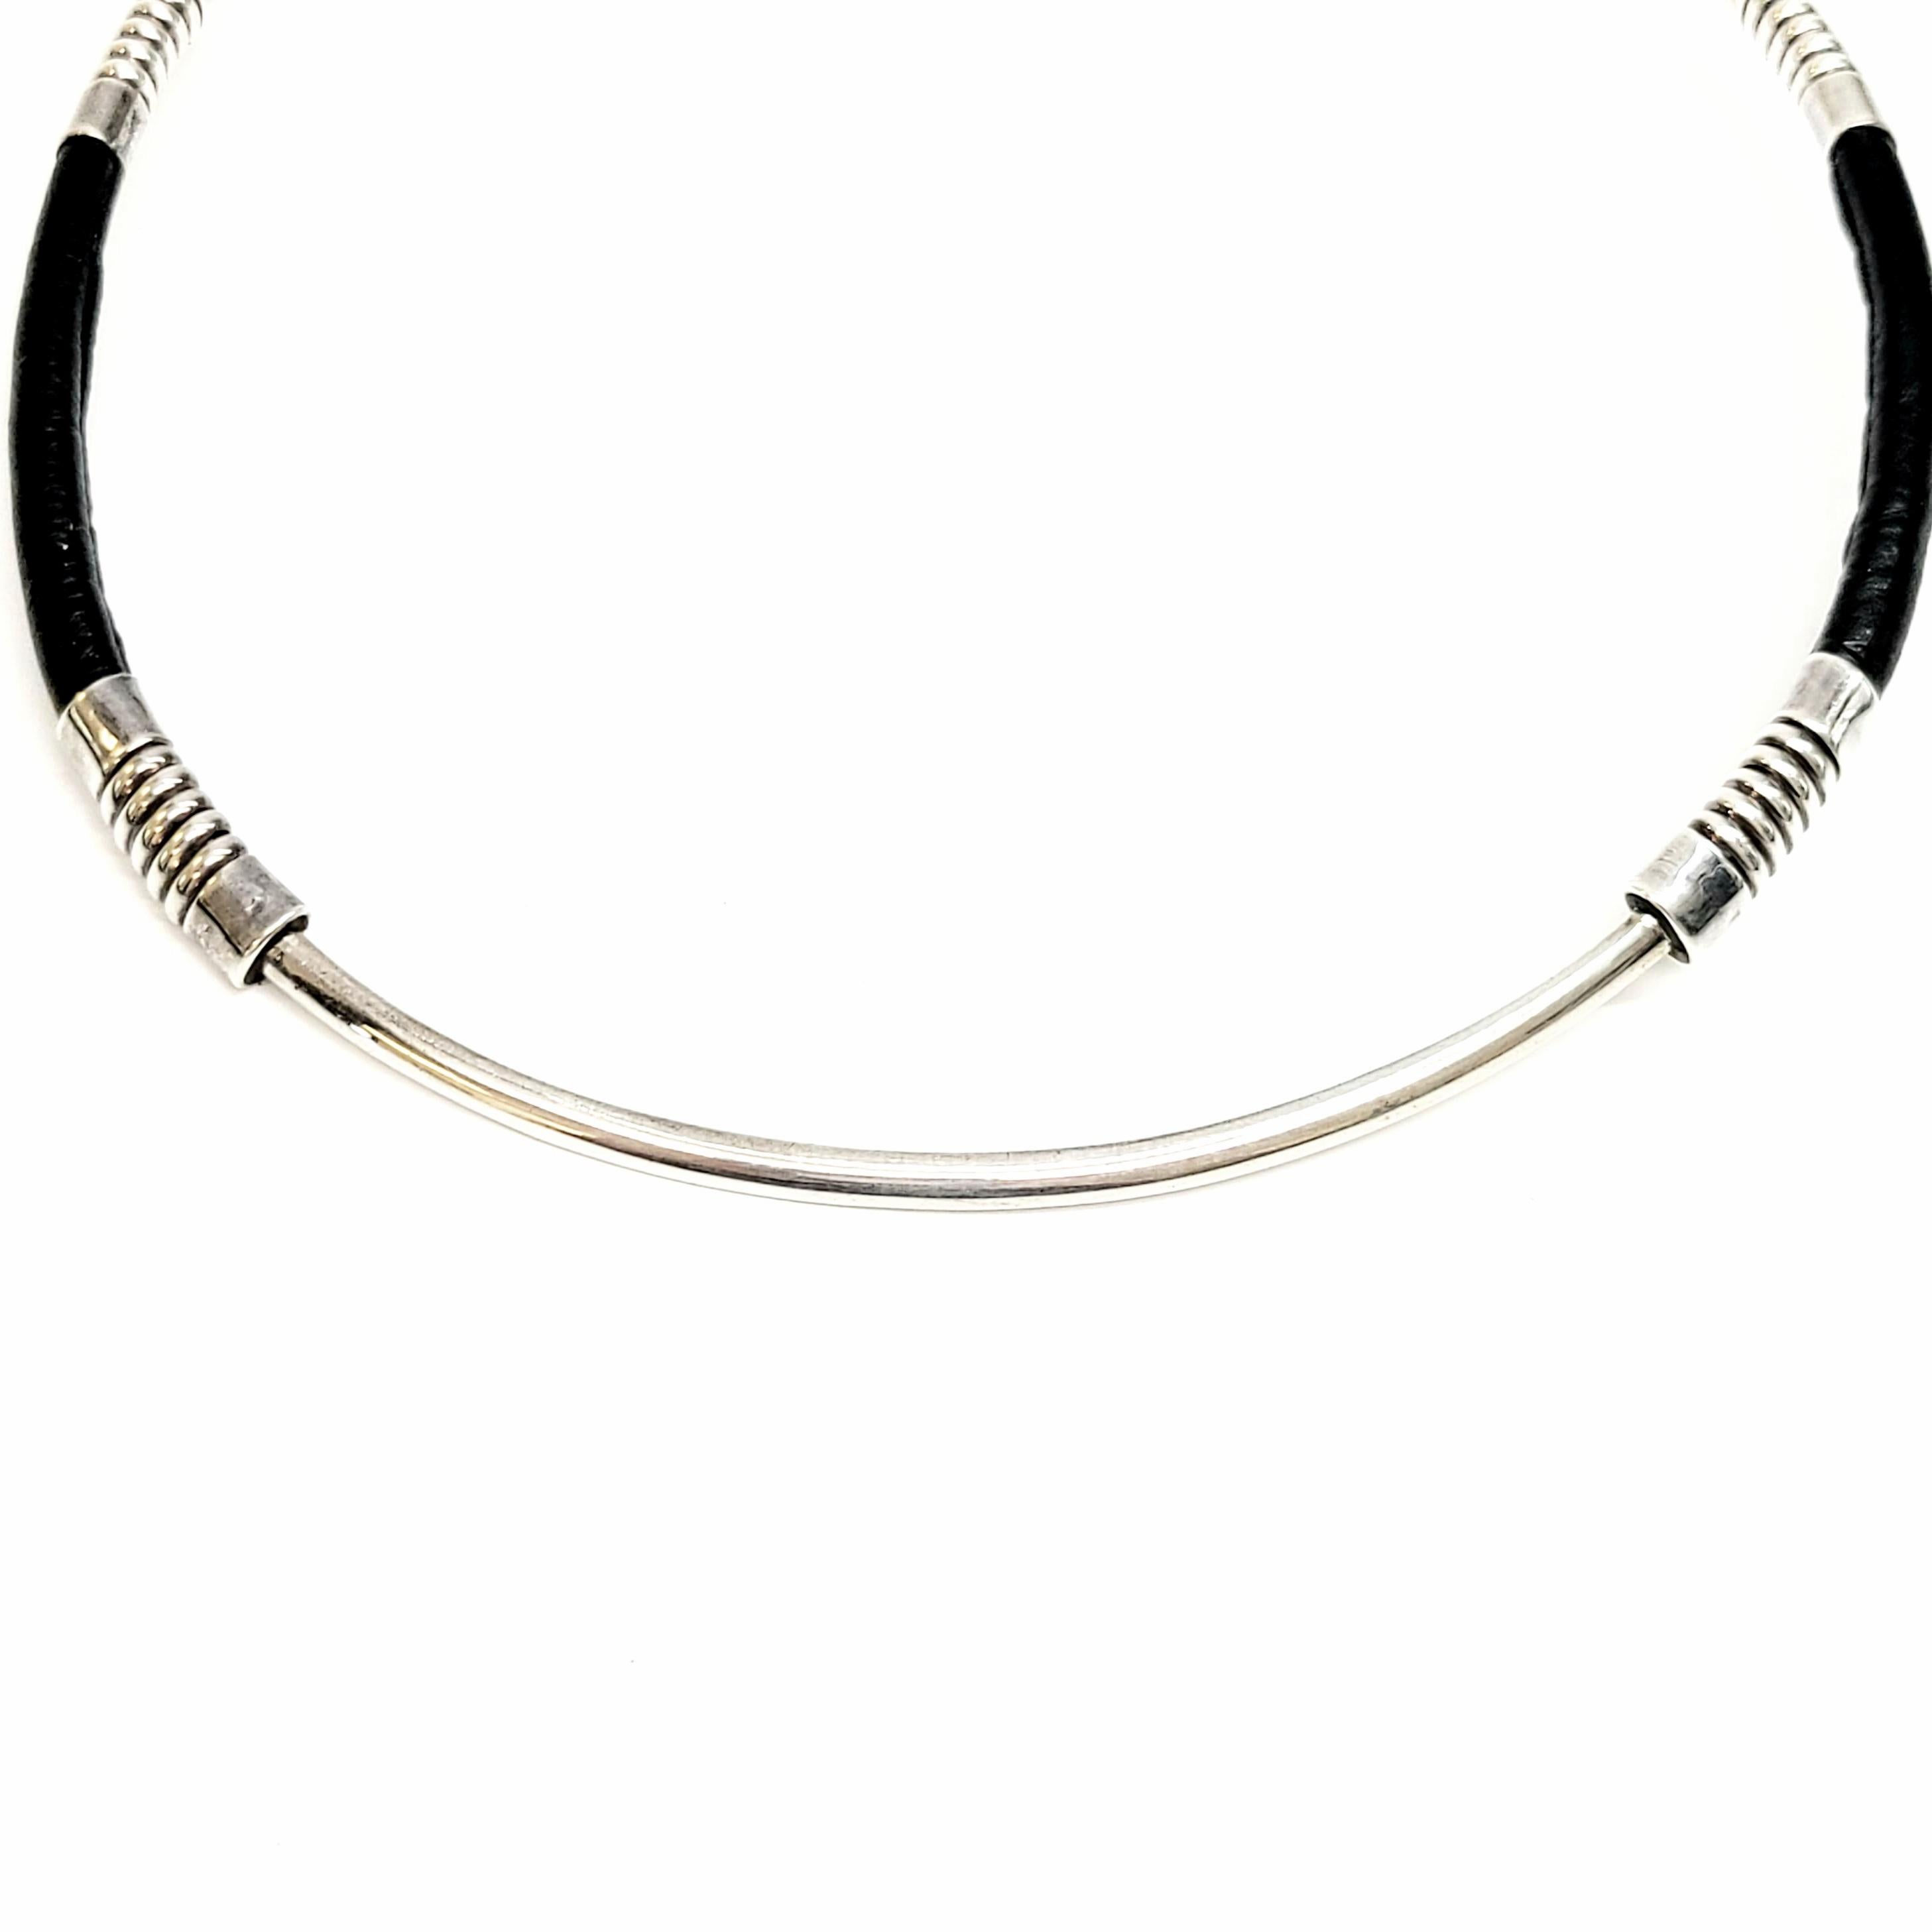 Women's or Men's Mexico MWS Sterling Silver and Leather Collar Necklace